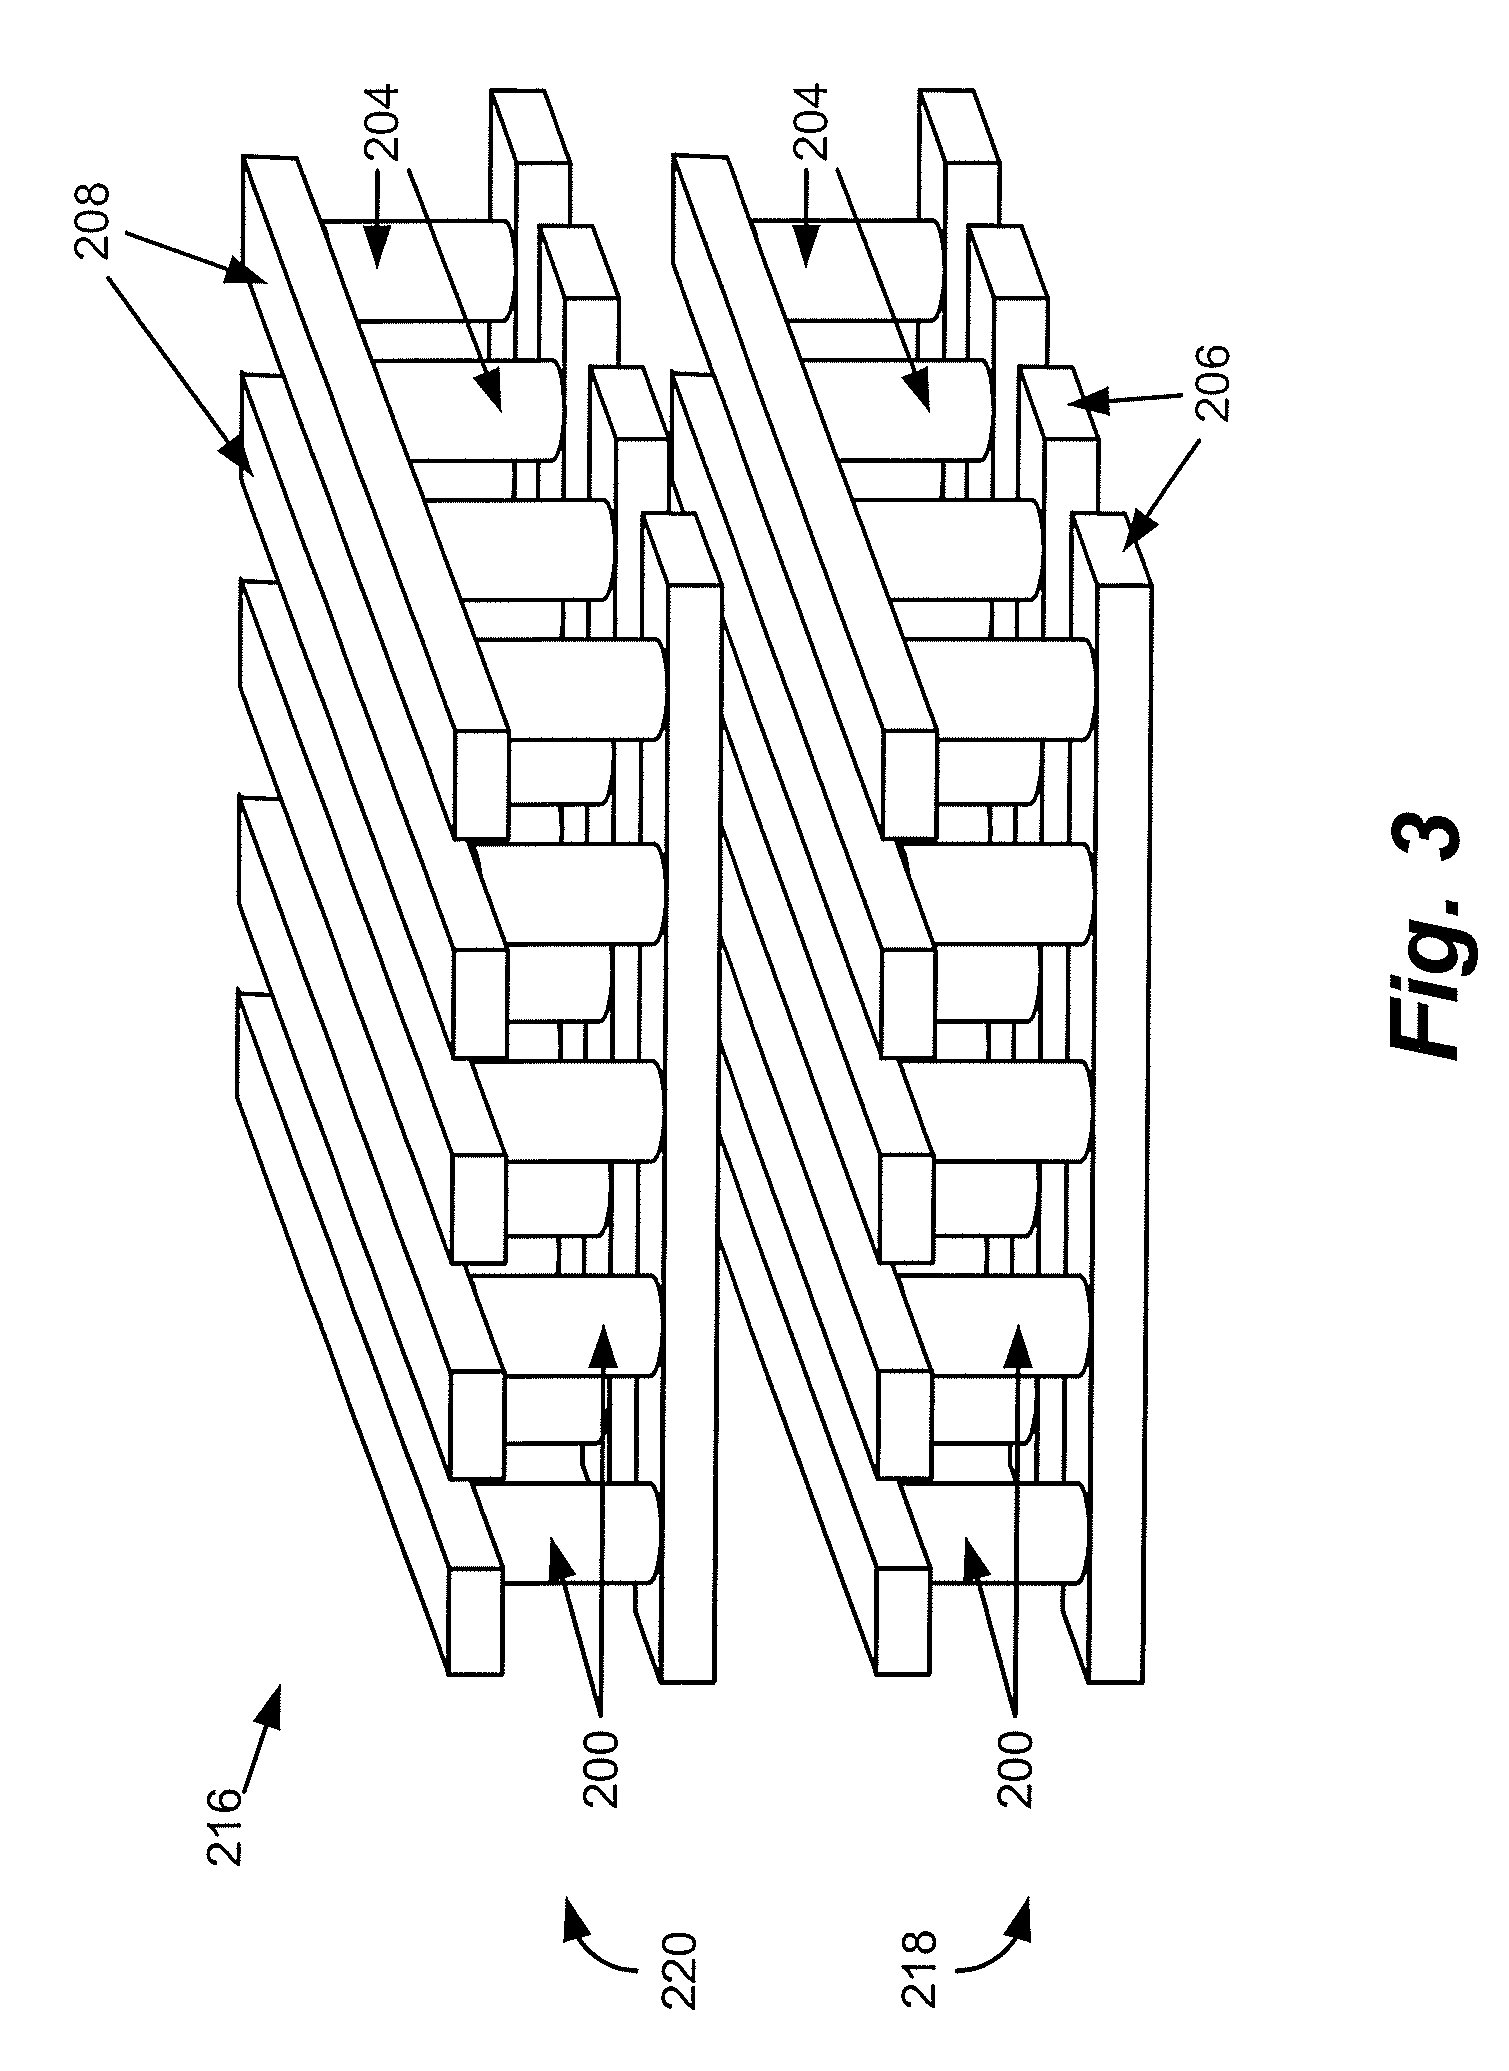 Capacitive discharge method for writing to non-volatile memory